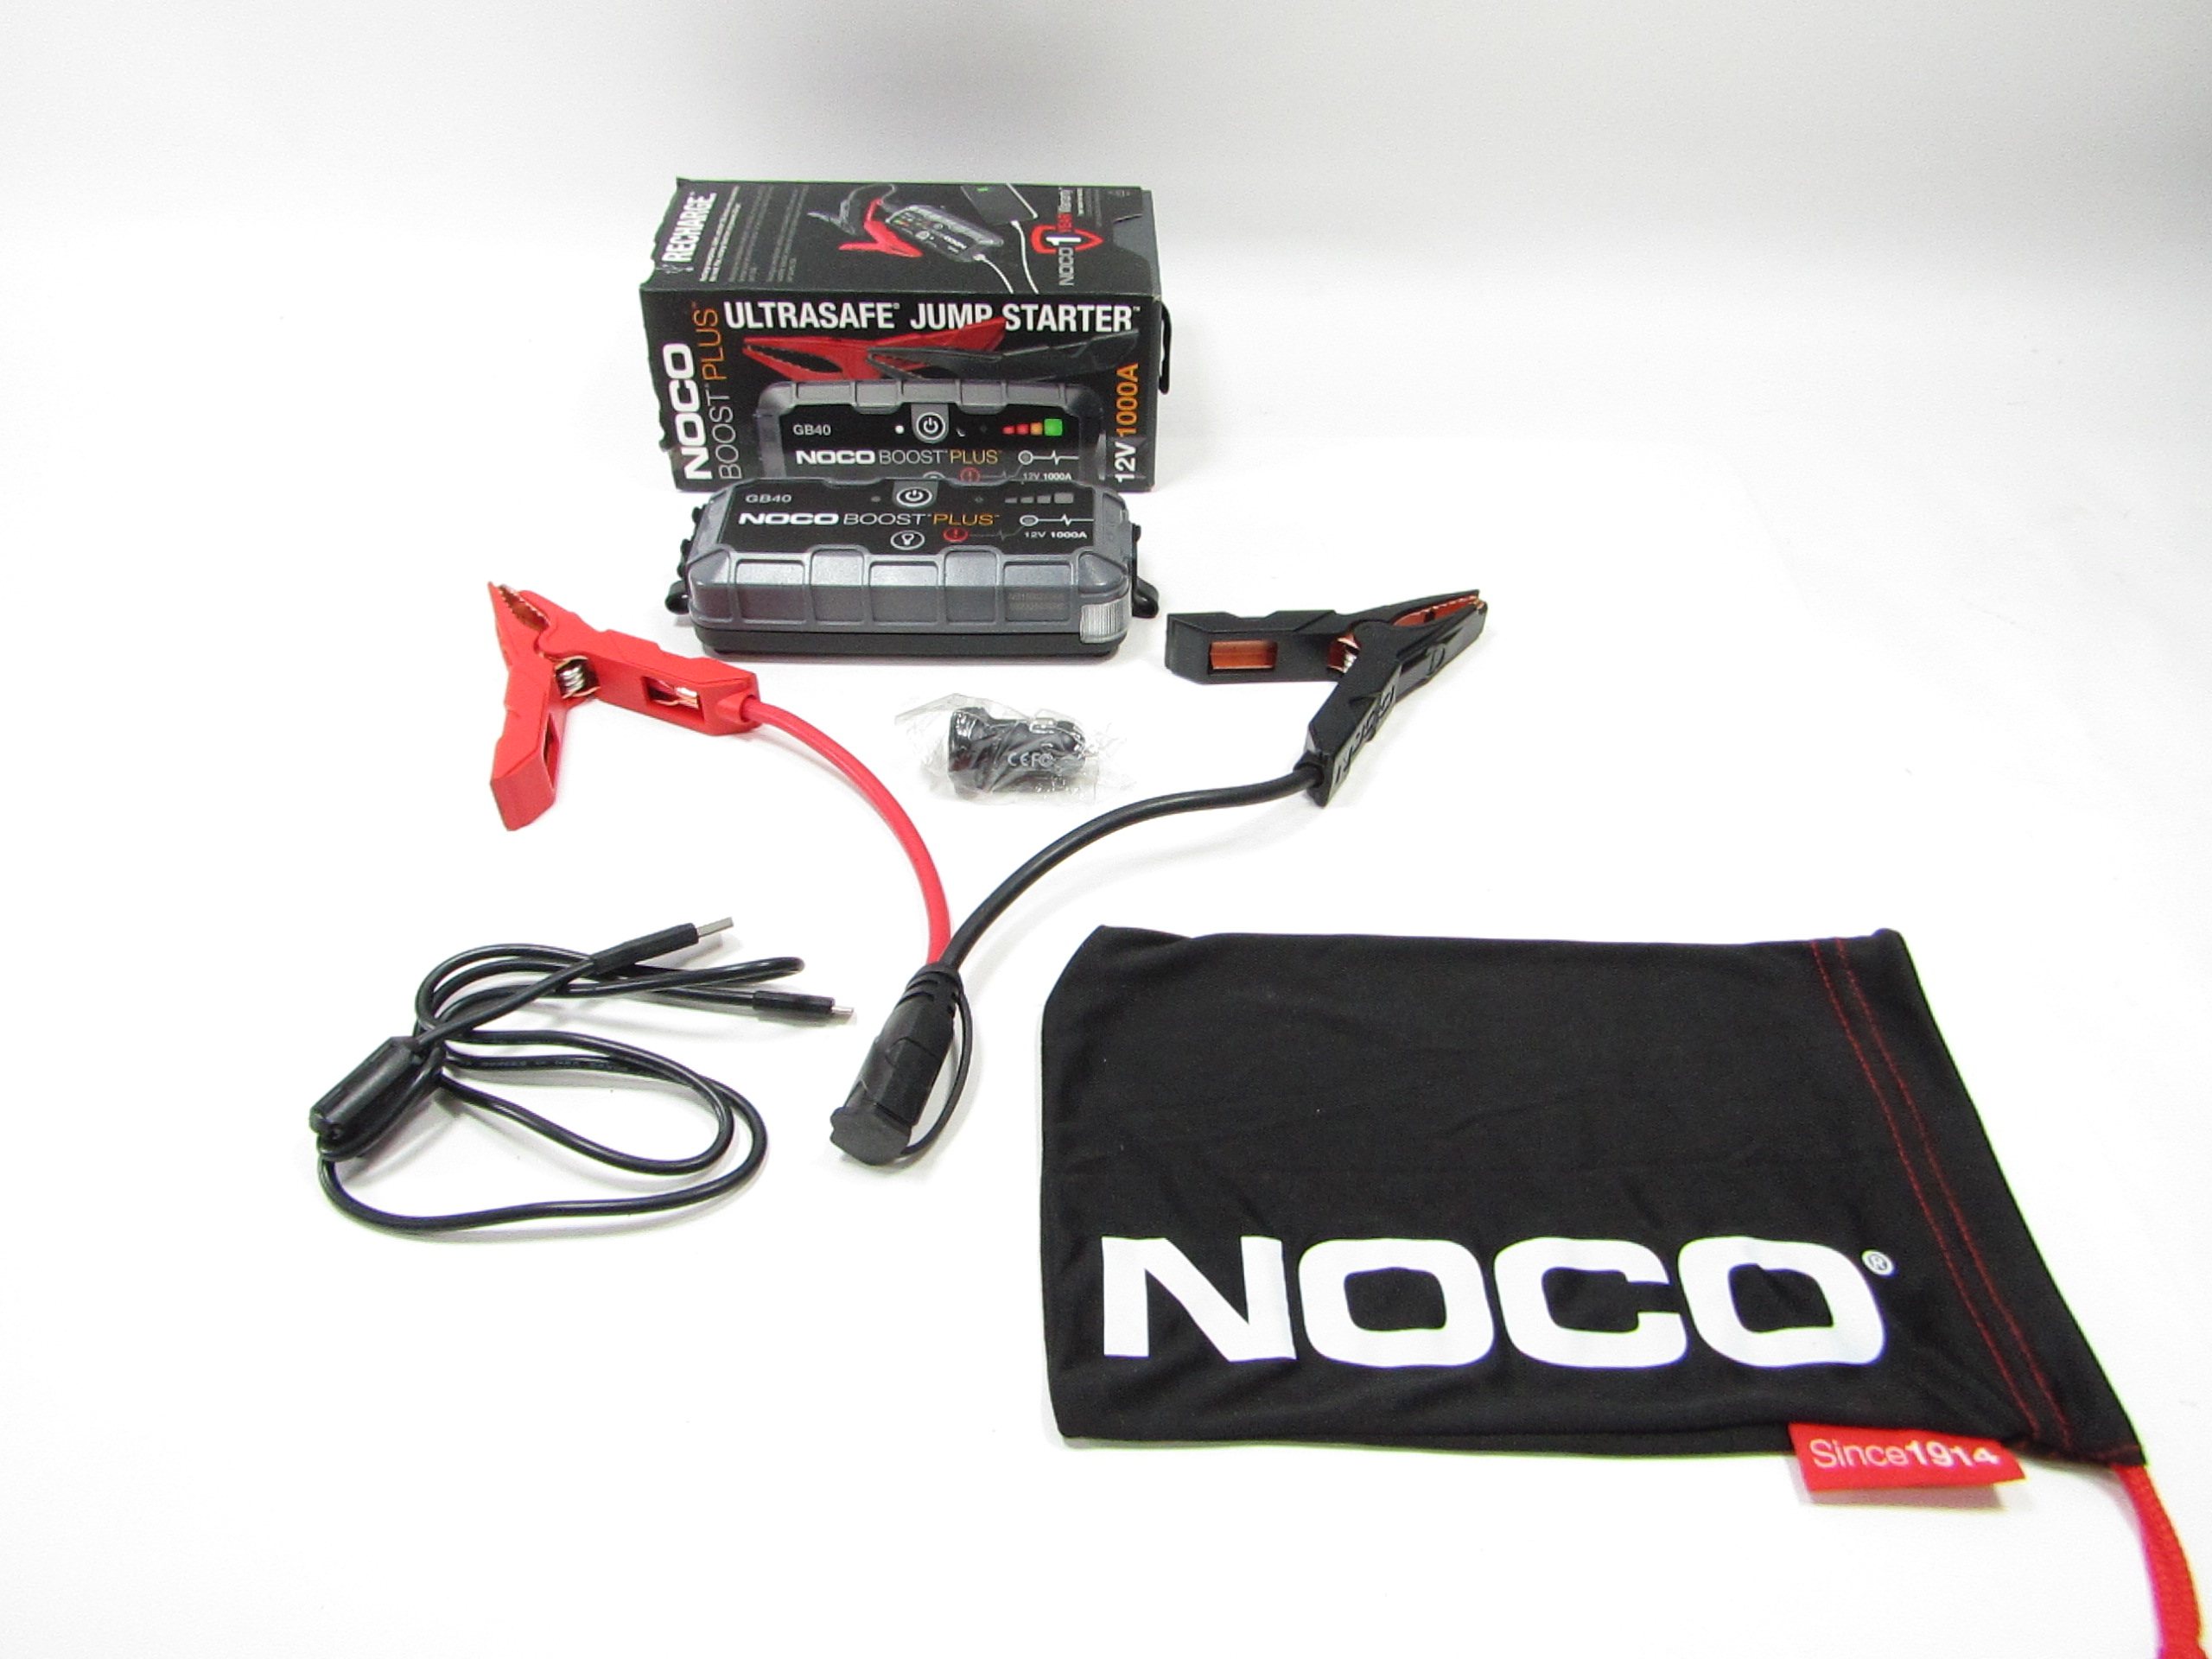 THE NOCO COMPANY Noco Boost Plus GB40 Ultrasafe Lithium Jump Starter, 1000  Amp, 12V